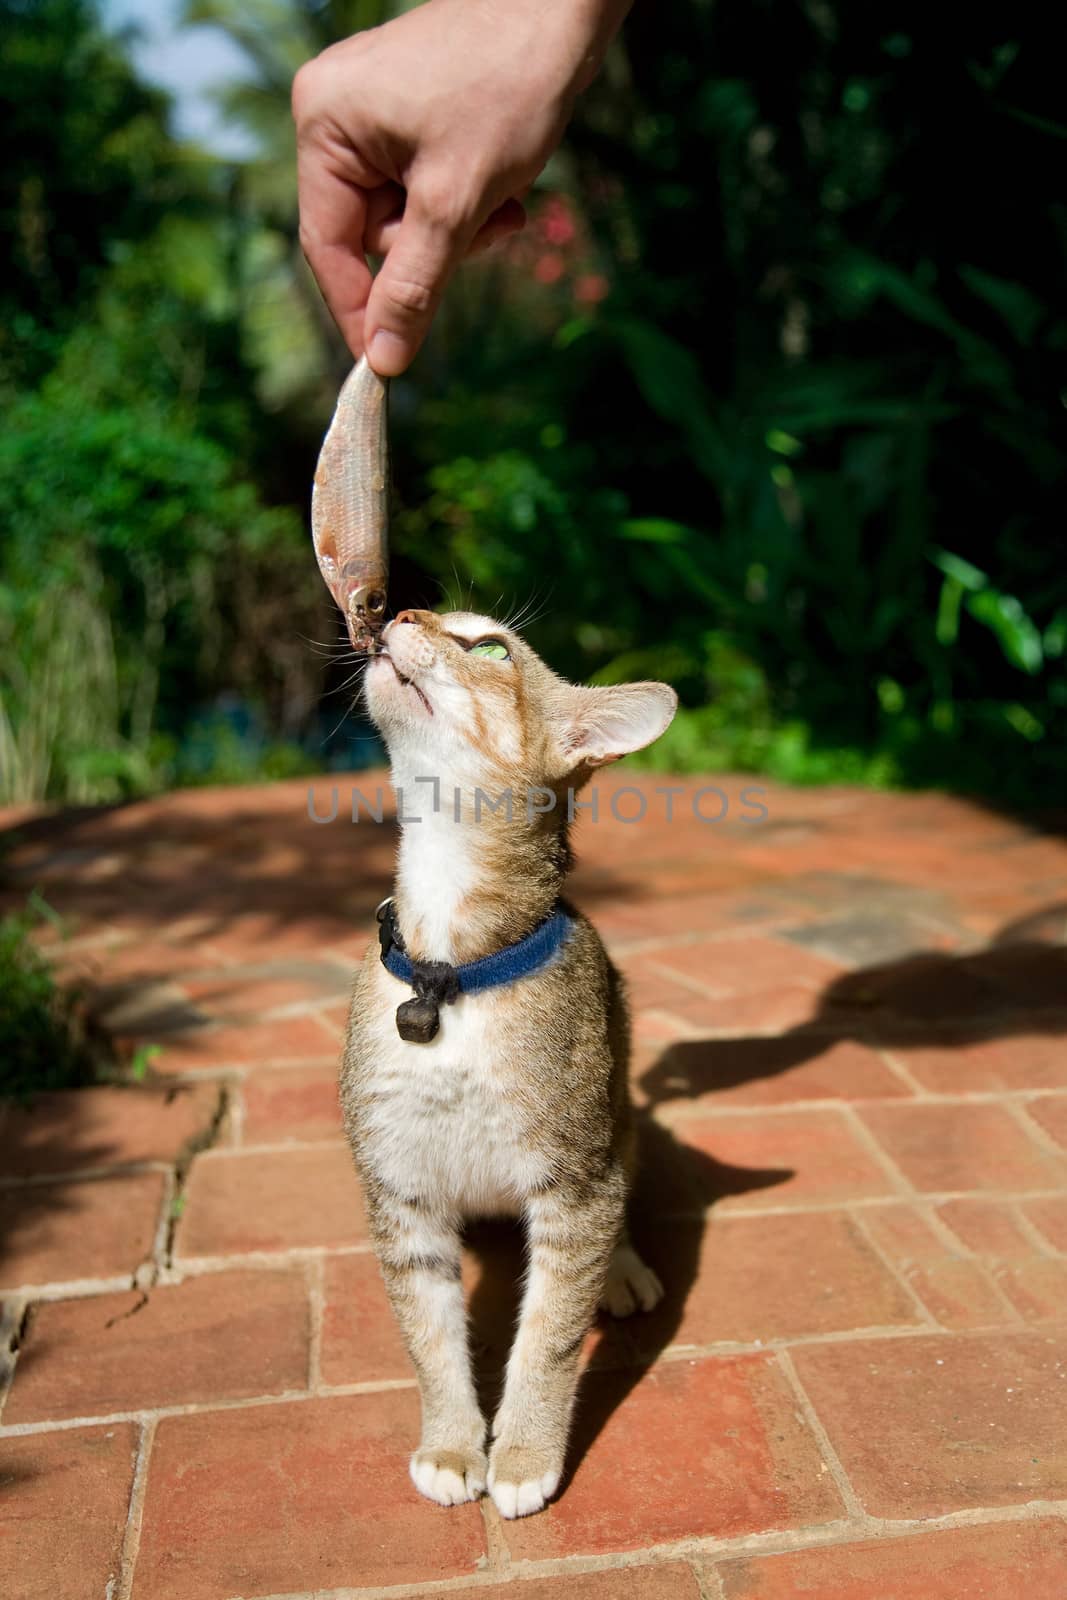 Man is offering a fresh sardine to the cat